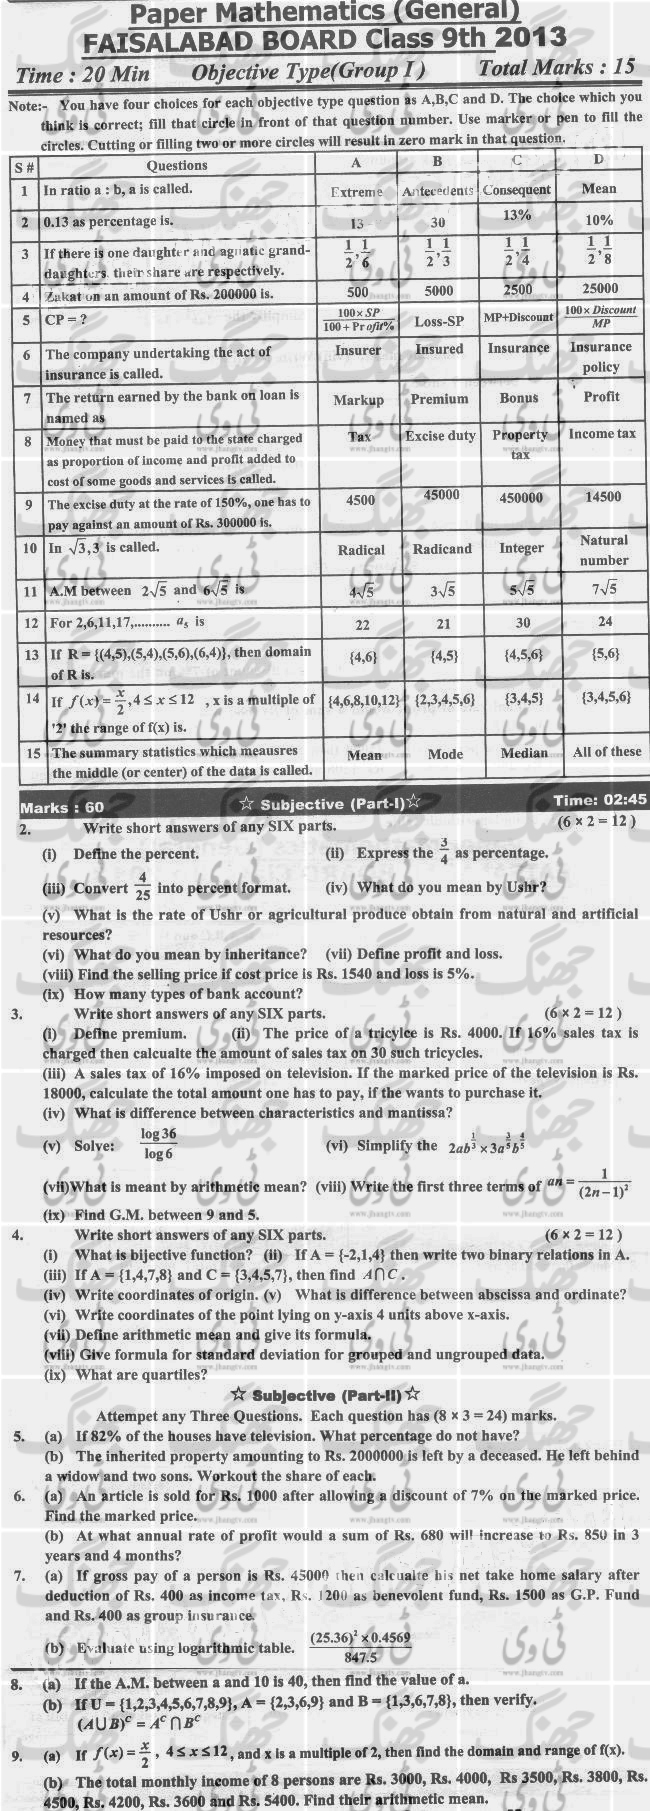 Past-Papers-2013-Faisalabad-Board-9th-Class-Mathematics-Group-1-English-Version copy